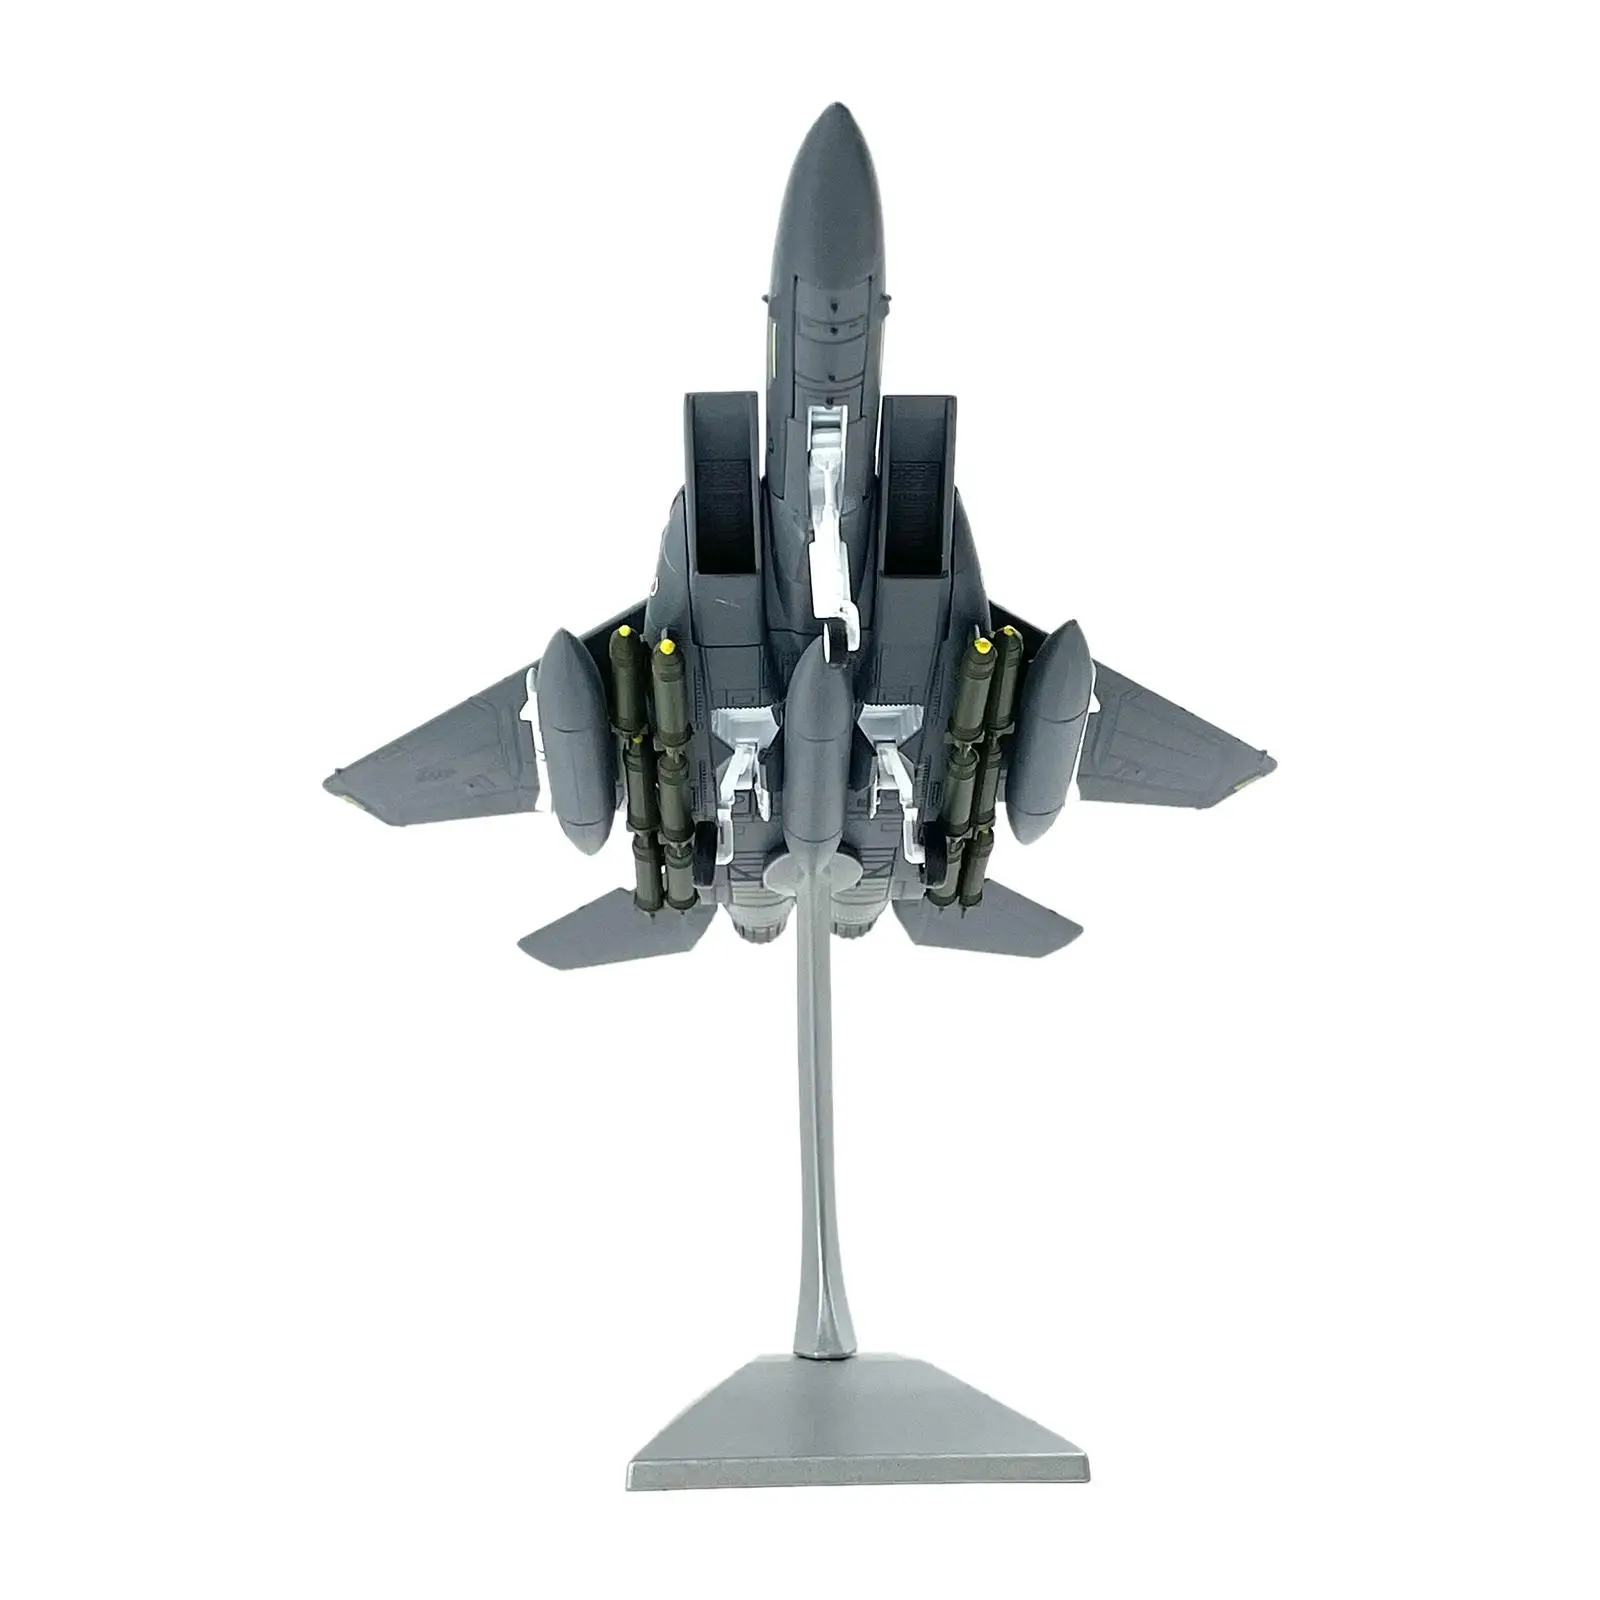 Diecast Alloy 1/100 F 15E Fighter Aircraft Plane Model Exquisite with Stand